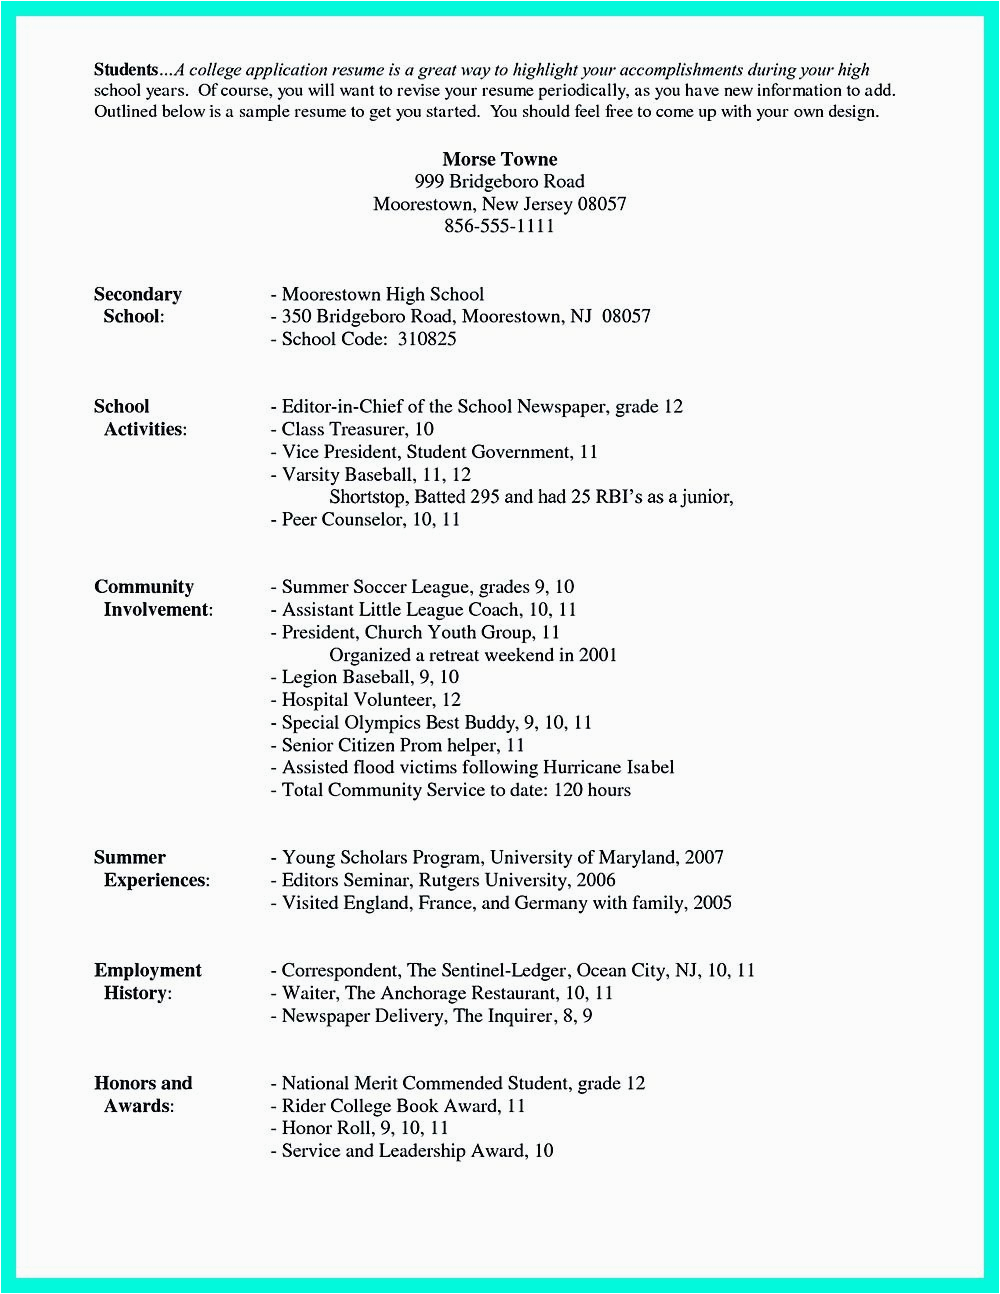 Sample High School Resume for College Admission How to Write College Admission Resume Dear